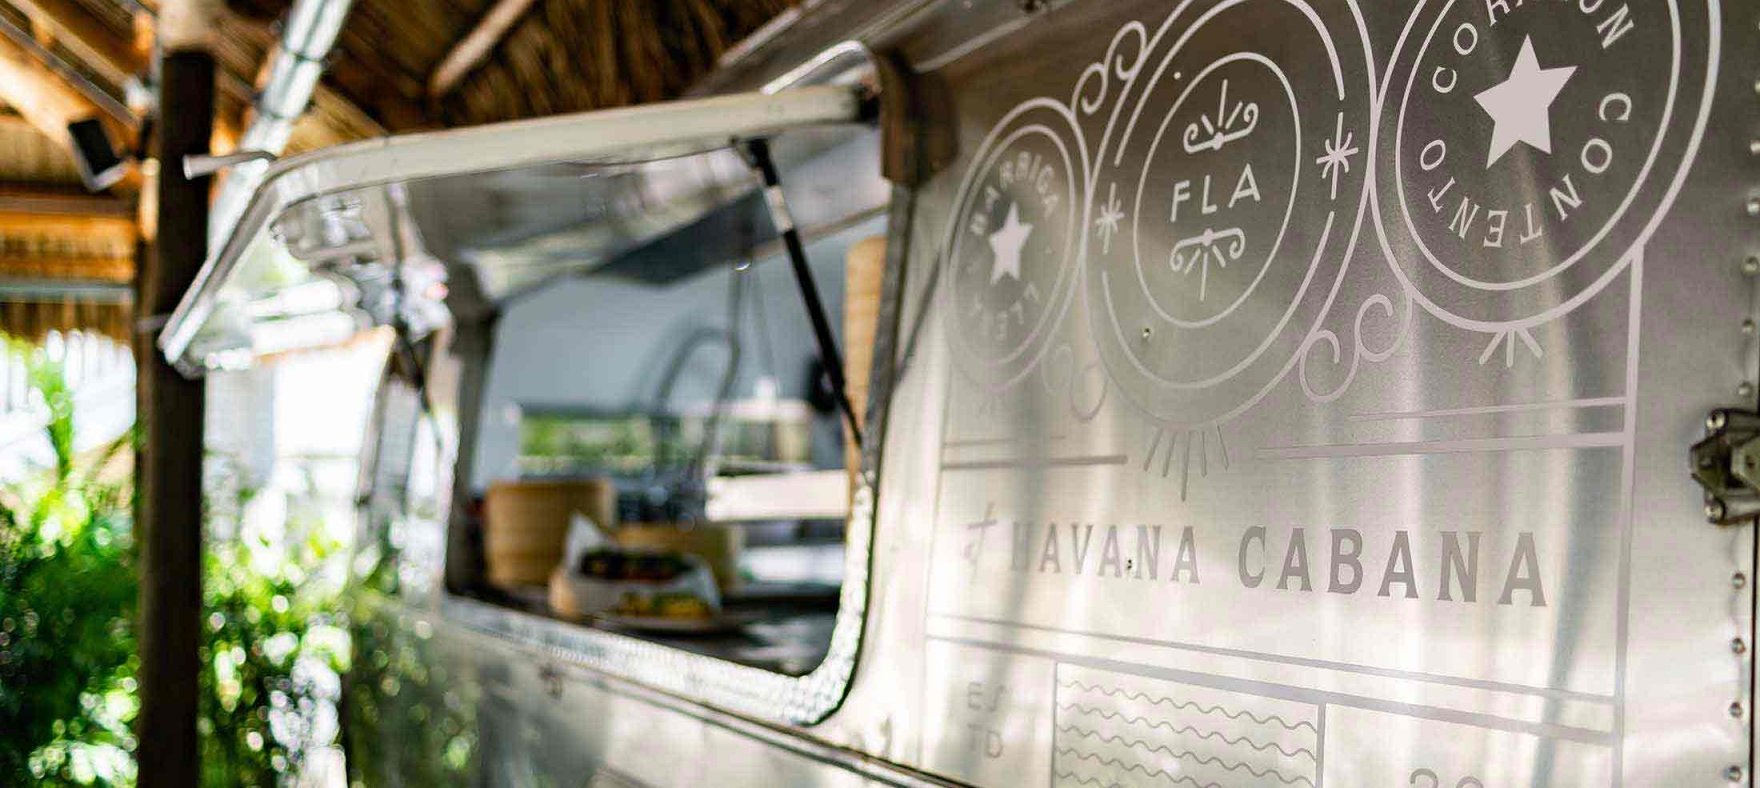 A close-up of the Floridita food truck with the window up